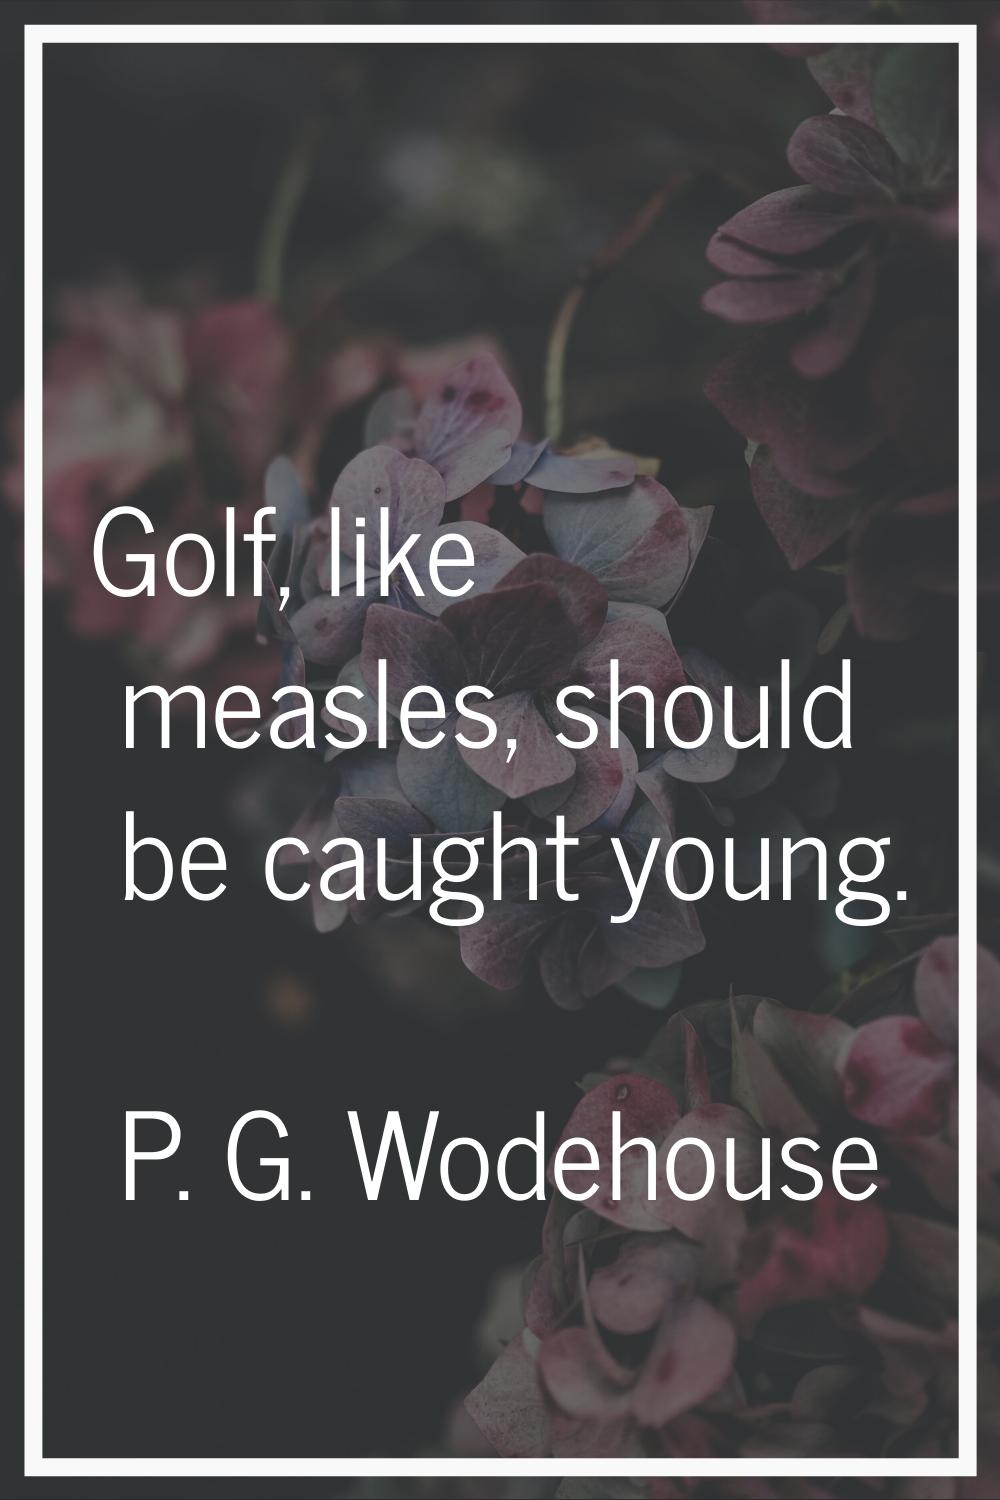 Golf, like measles, should be caught young.